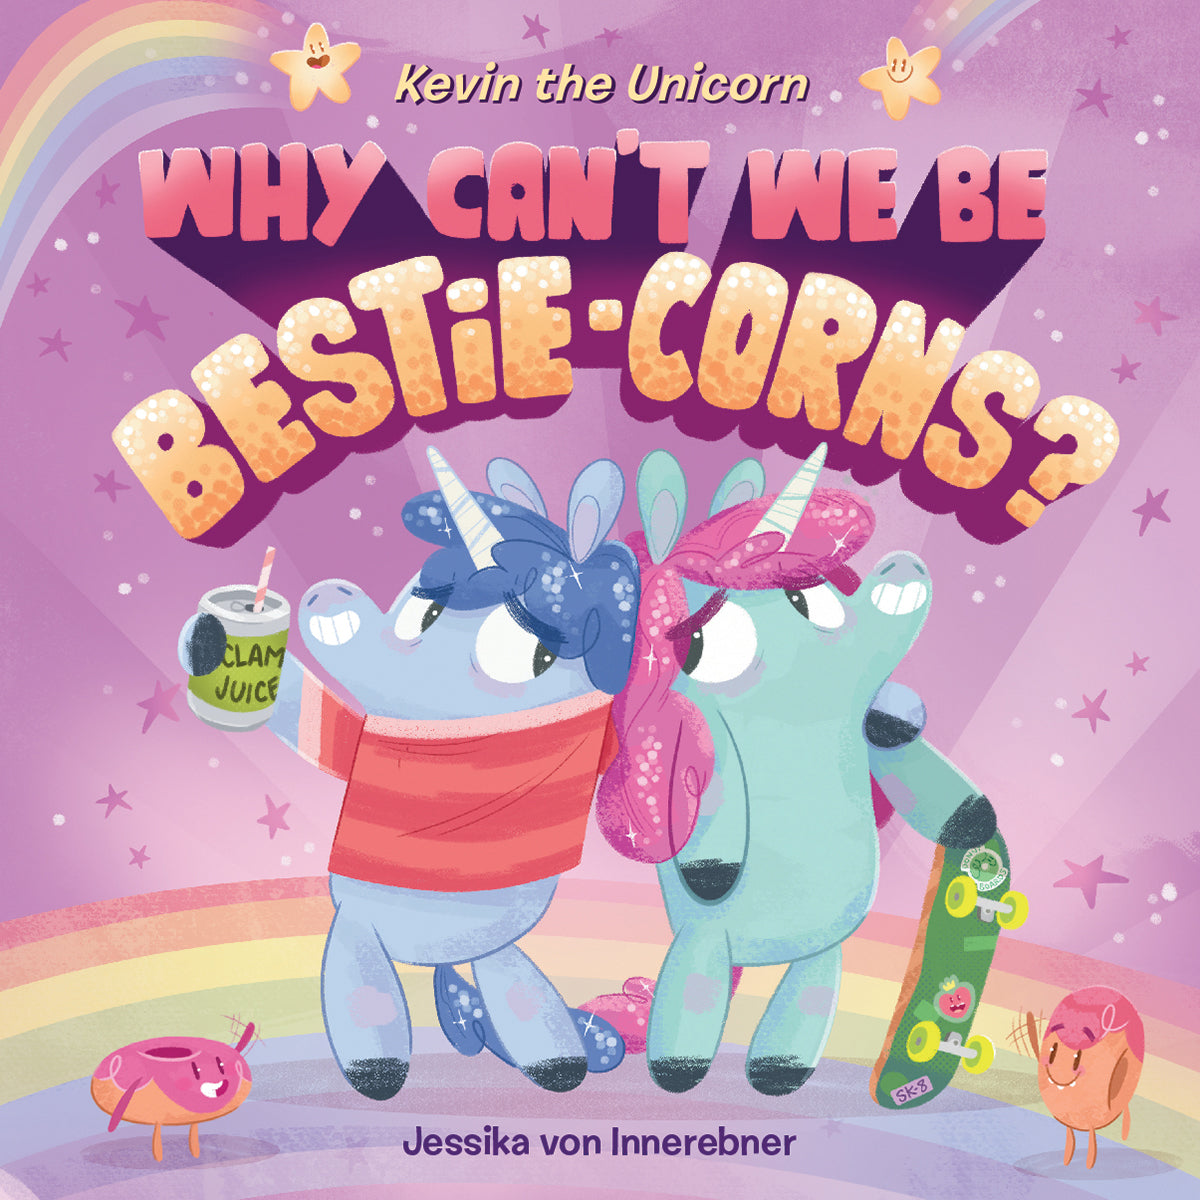 Why Can't We Be Bestie-corns?